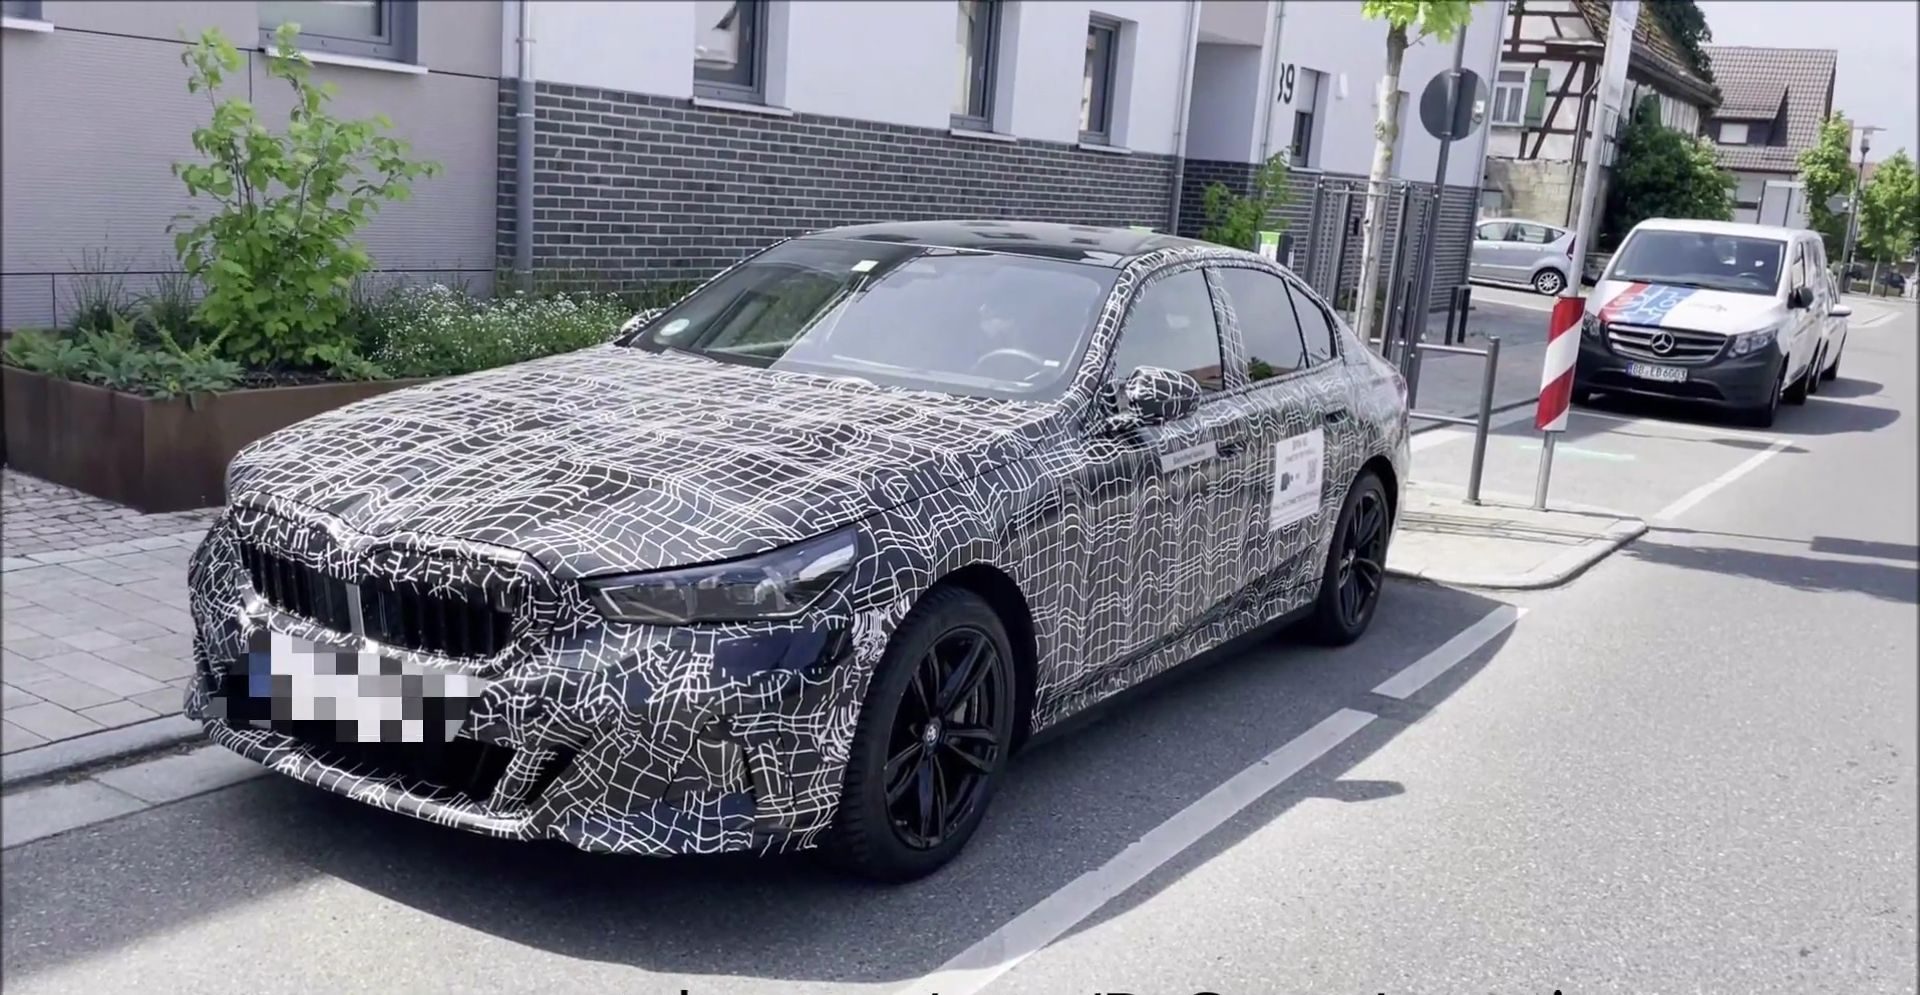 700-HP BMW G90 M5 Reveals High-Performance Specs and Plug-In Hybrid Tech